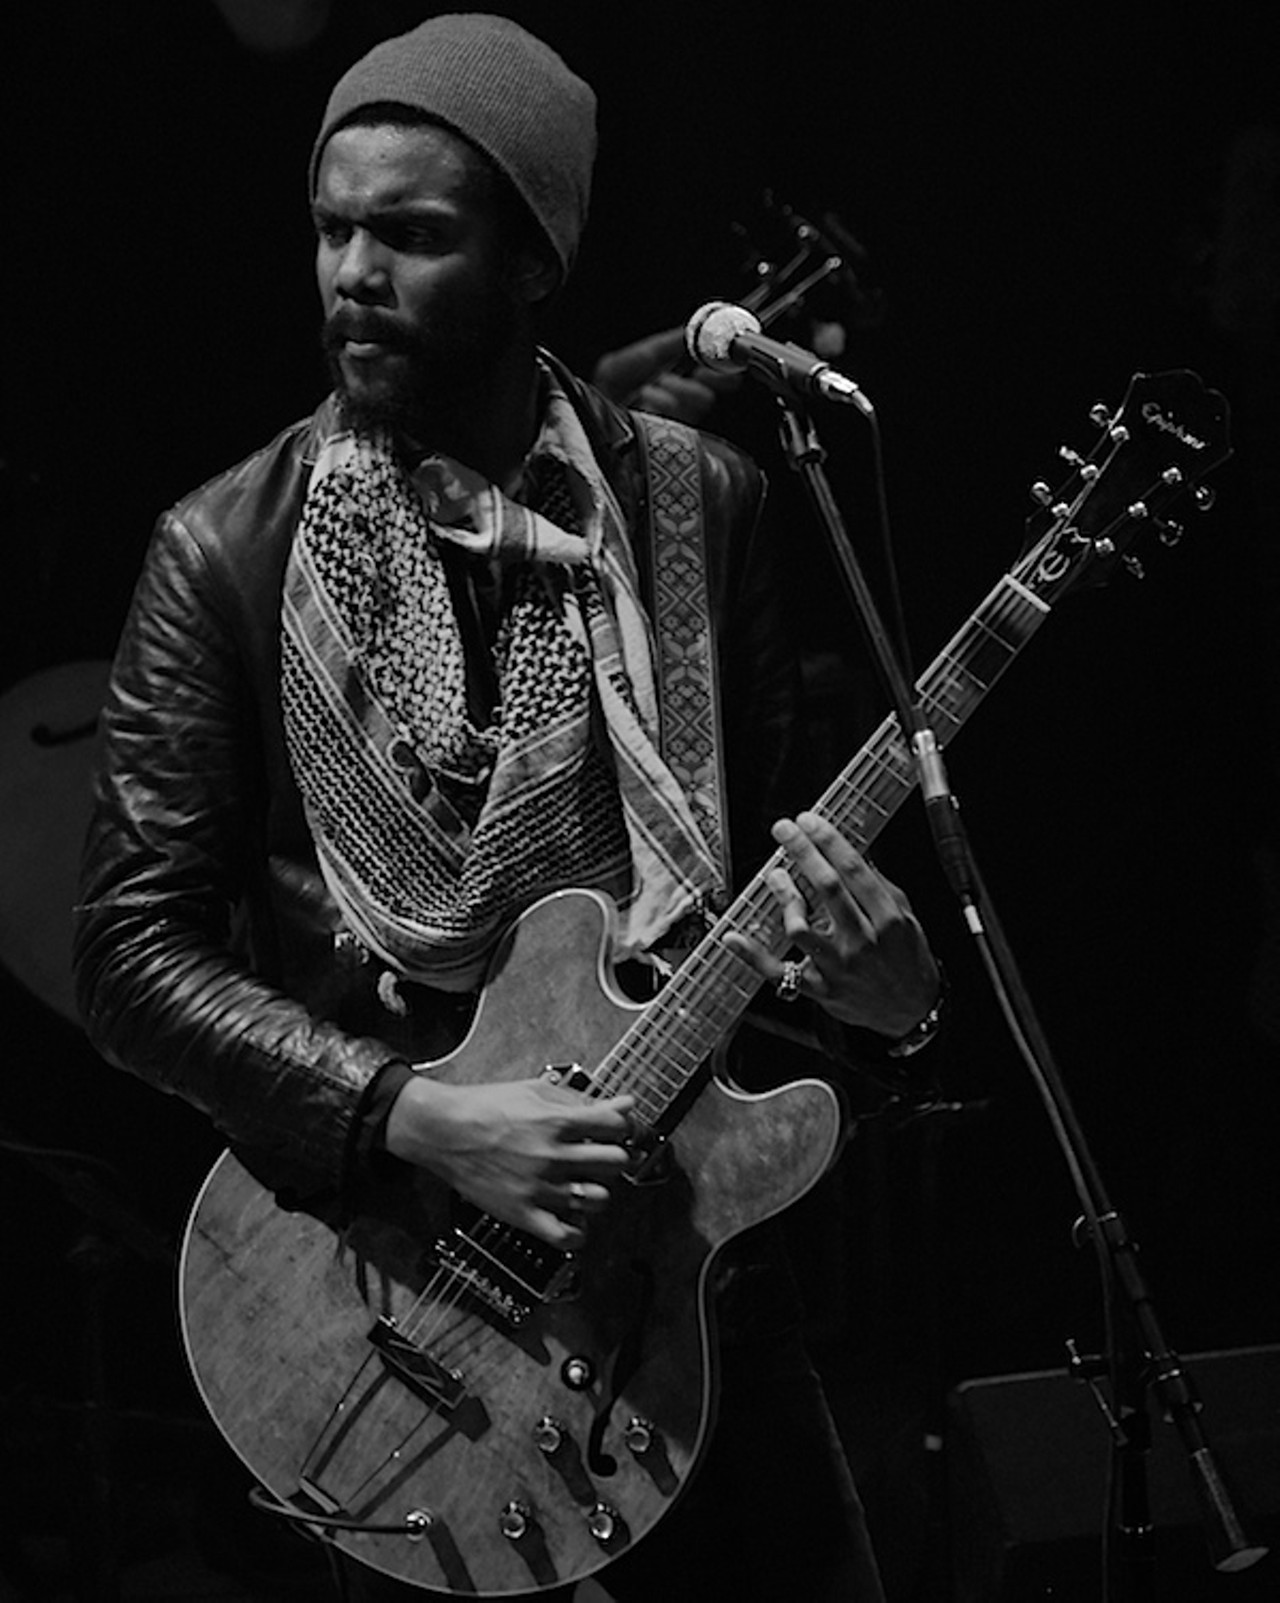 Gary Clark Jr. and opener Austin Walkin Cane performing at House of Blues